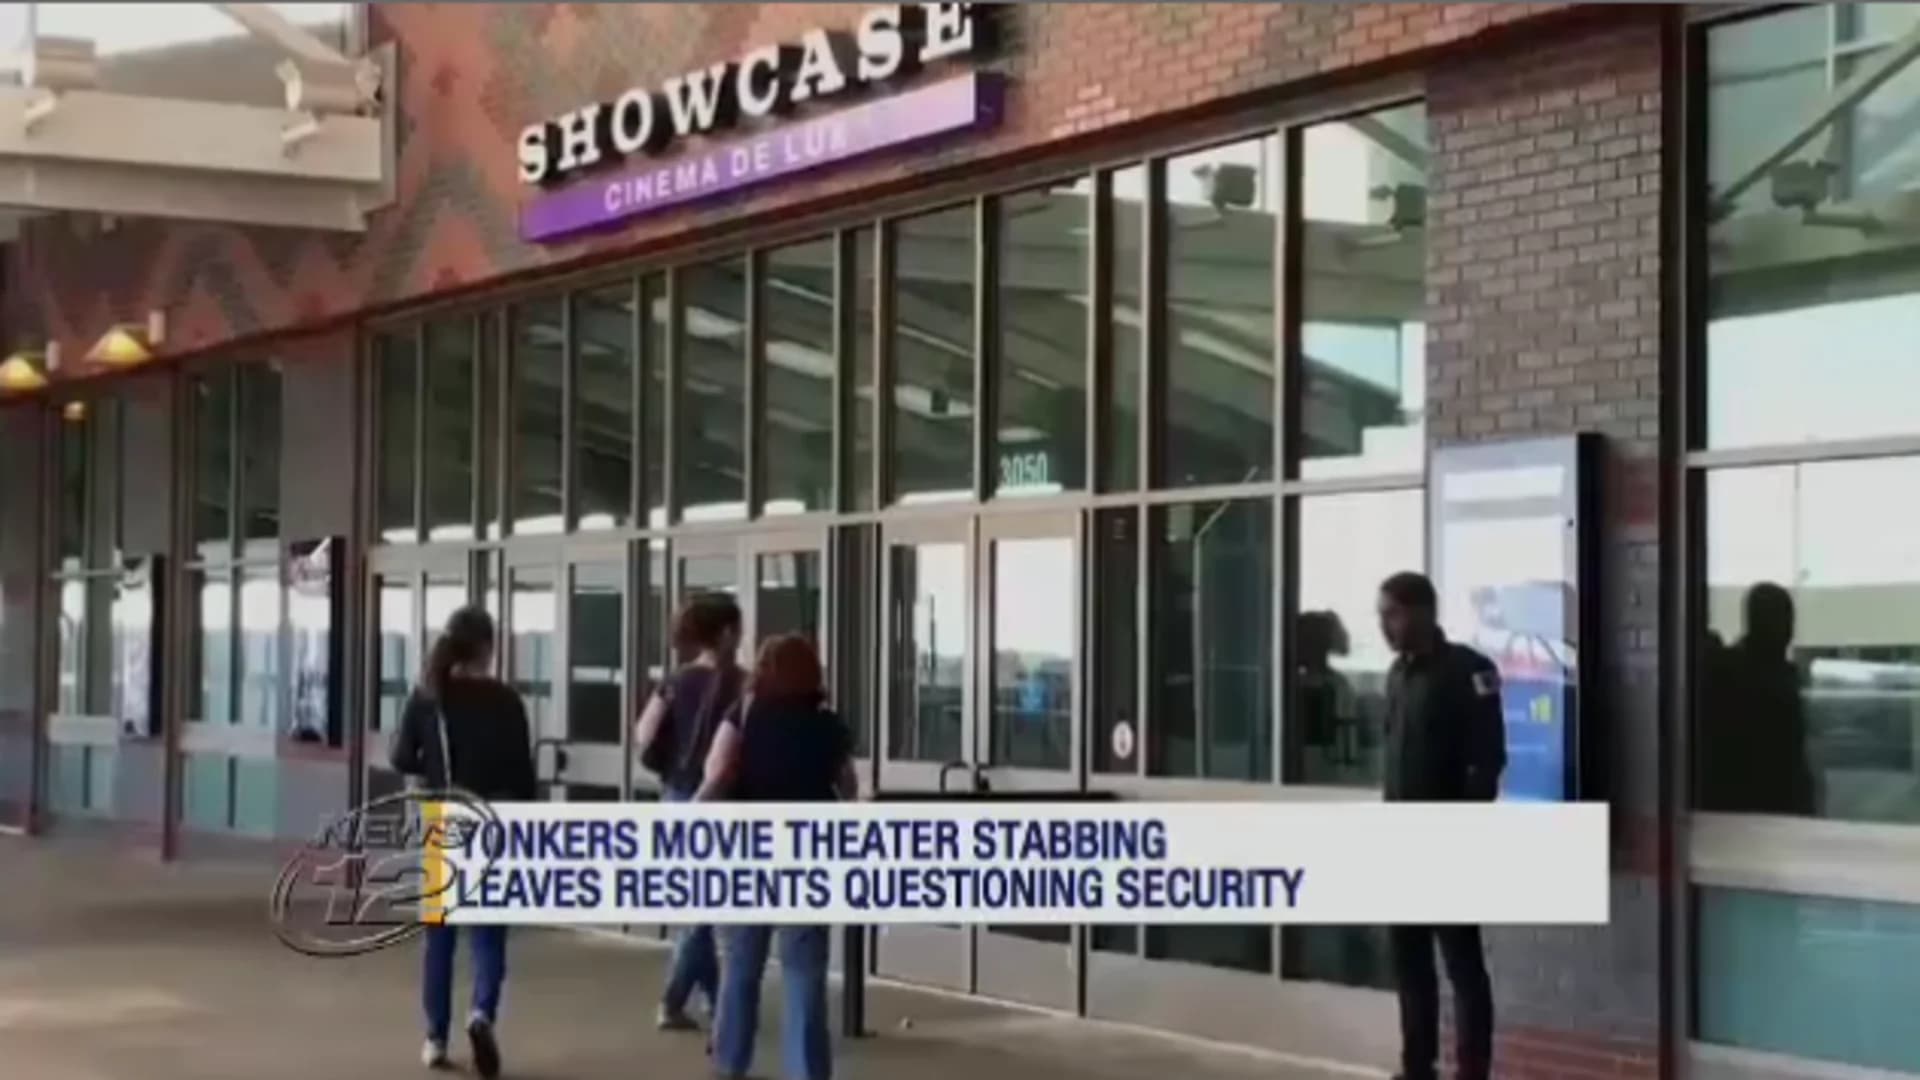 Theater stabbing prompts security questions